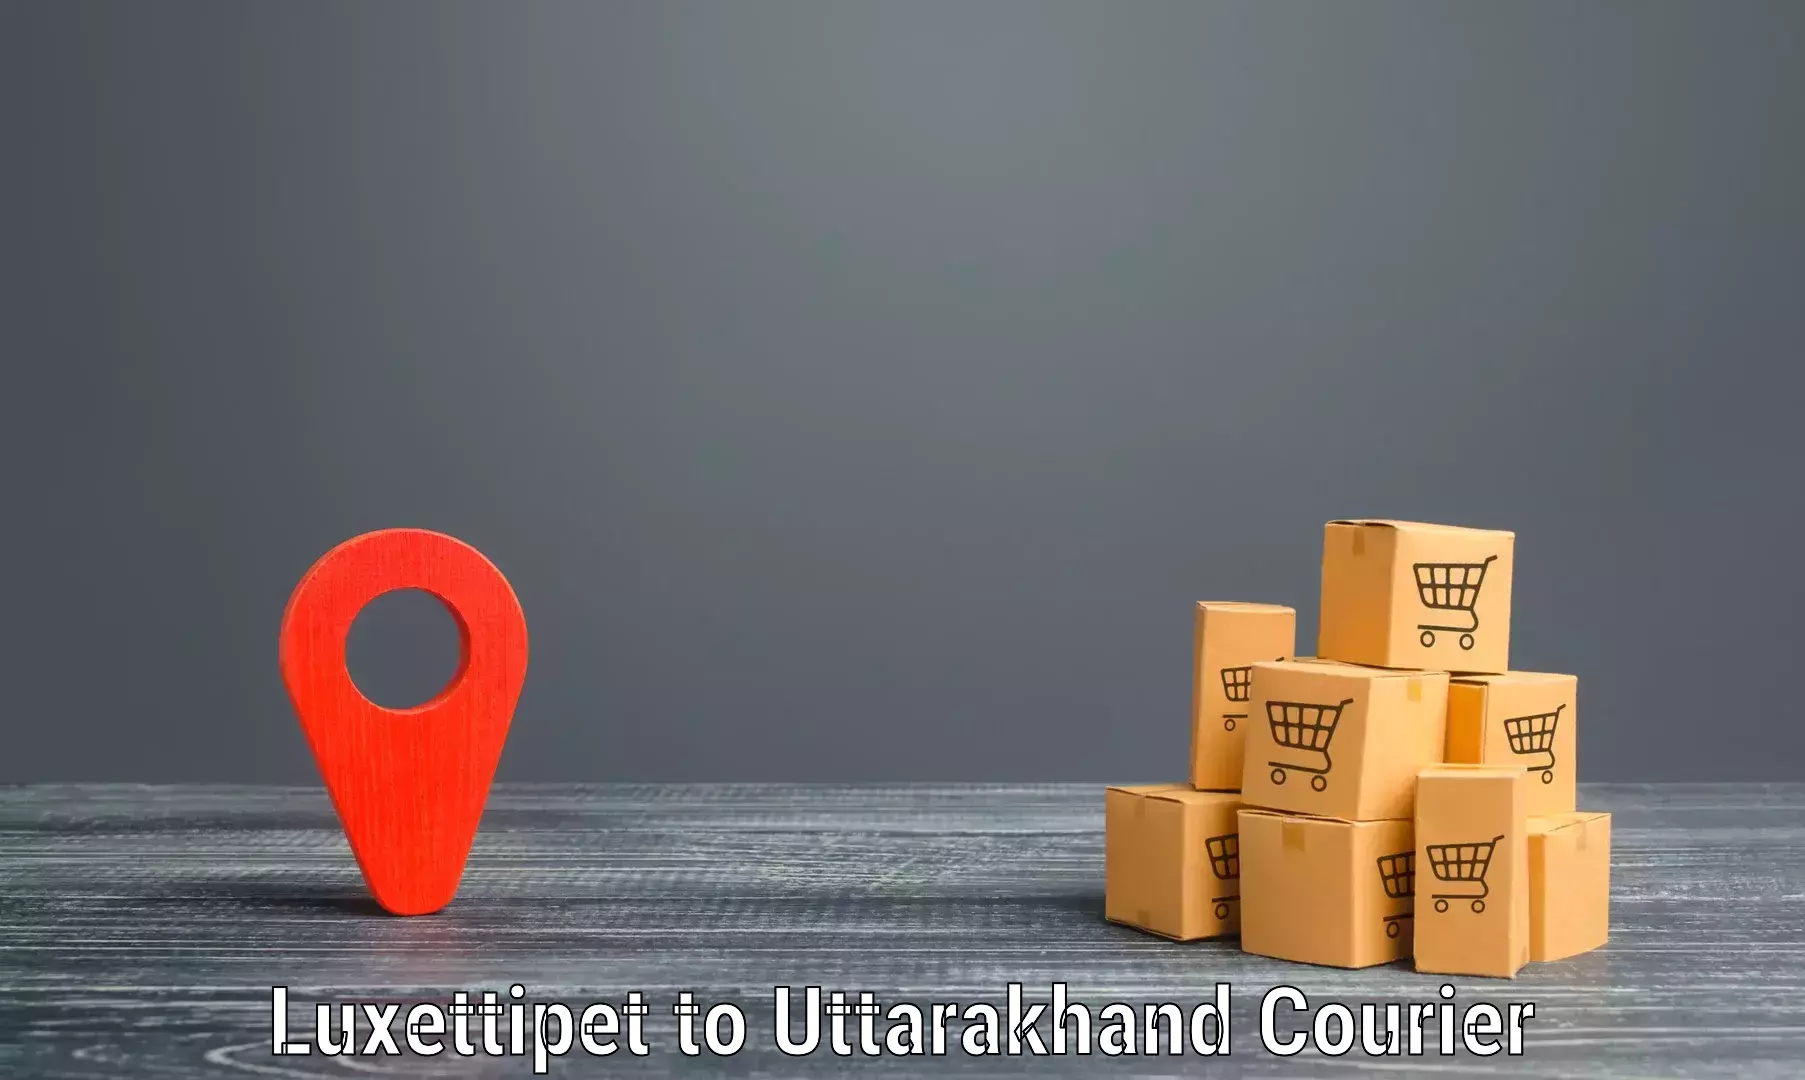 Reliable logistics providers Luxettipet to Pithoragarh